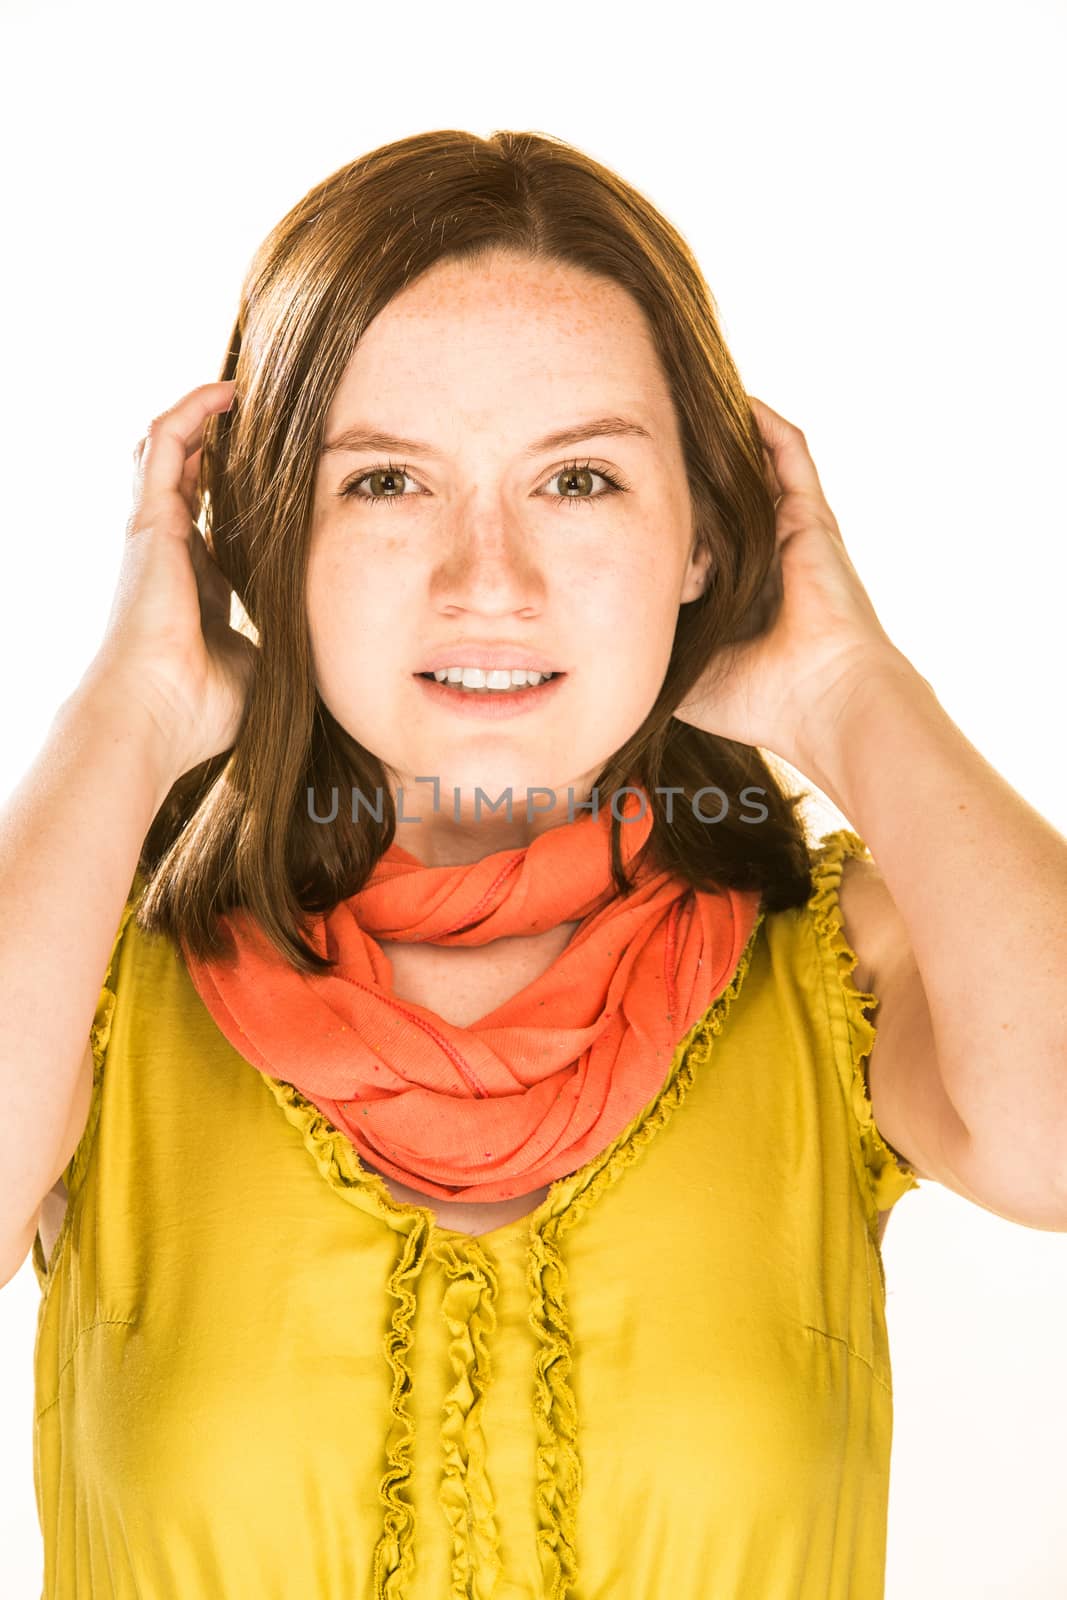 Pretty girl with a stressed expression on white background